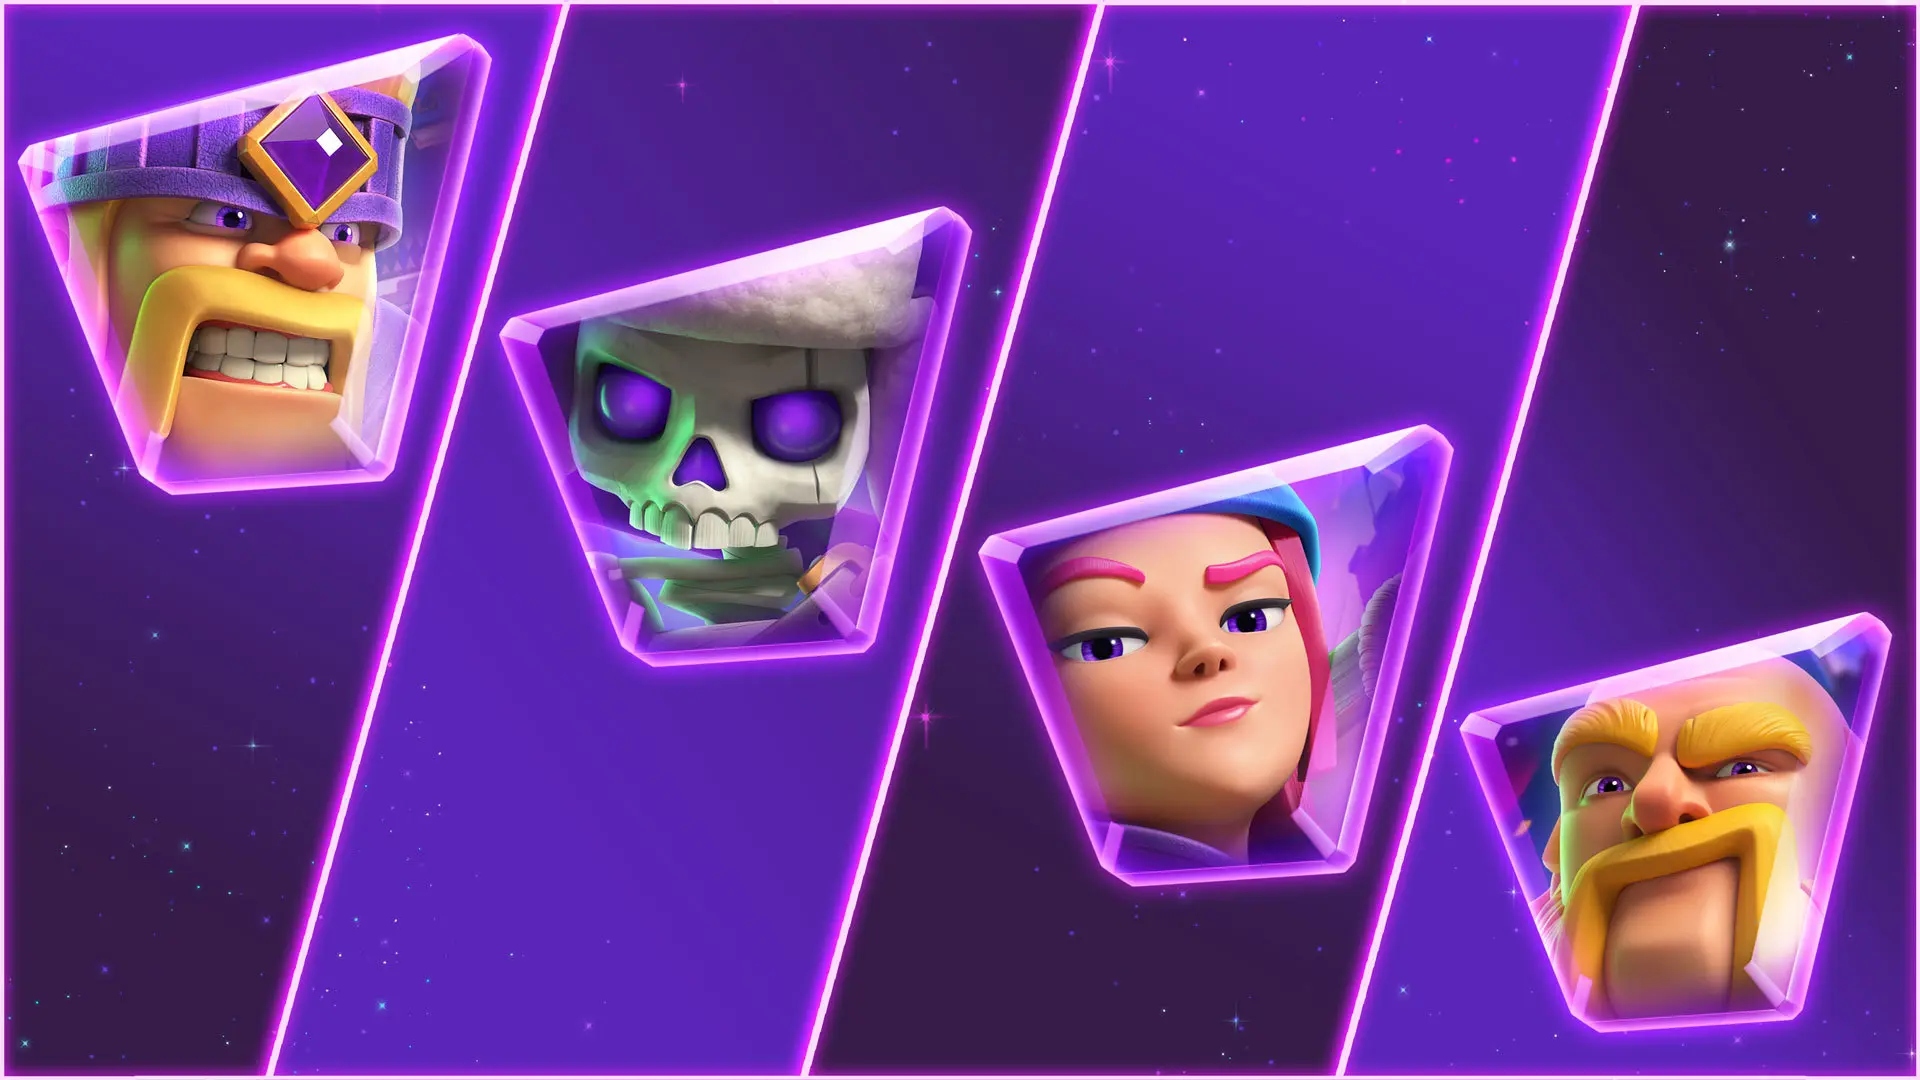 4 characters you can evolve in Clash Royale.